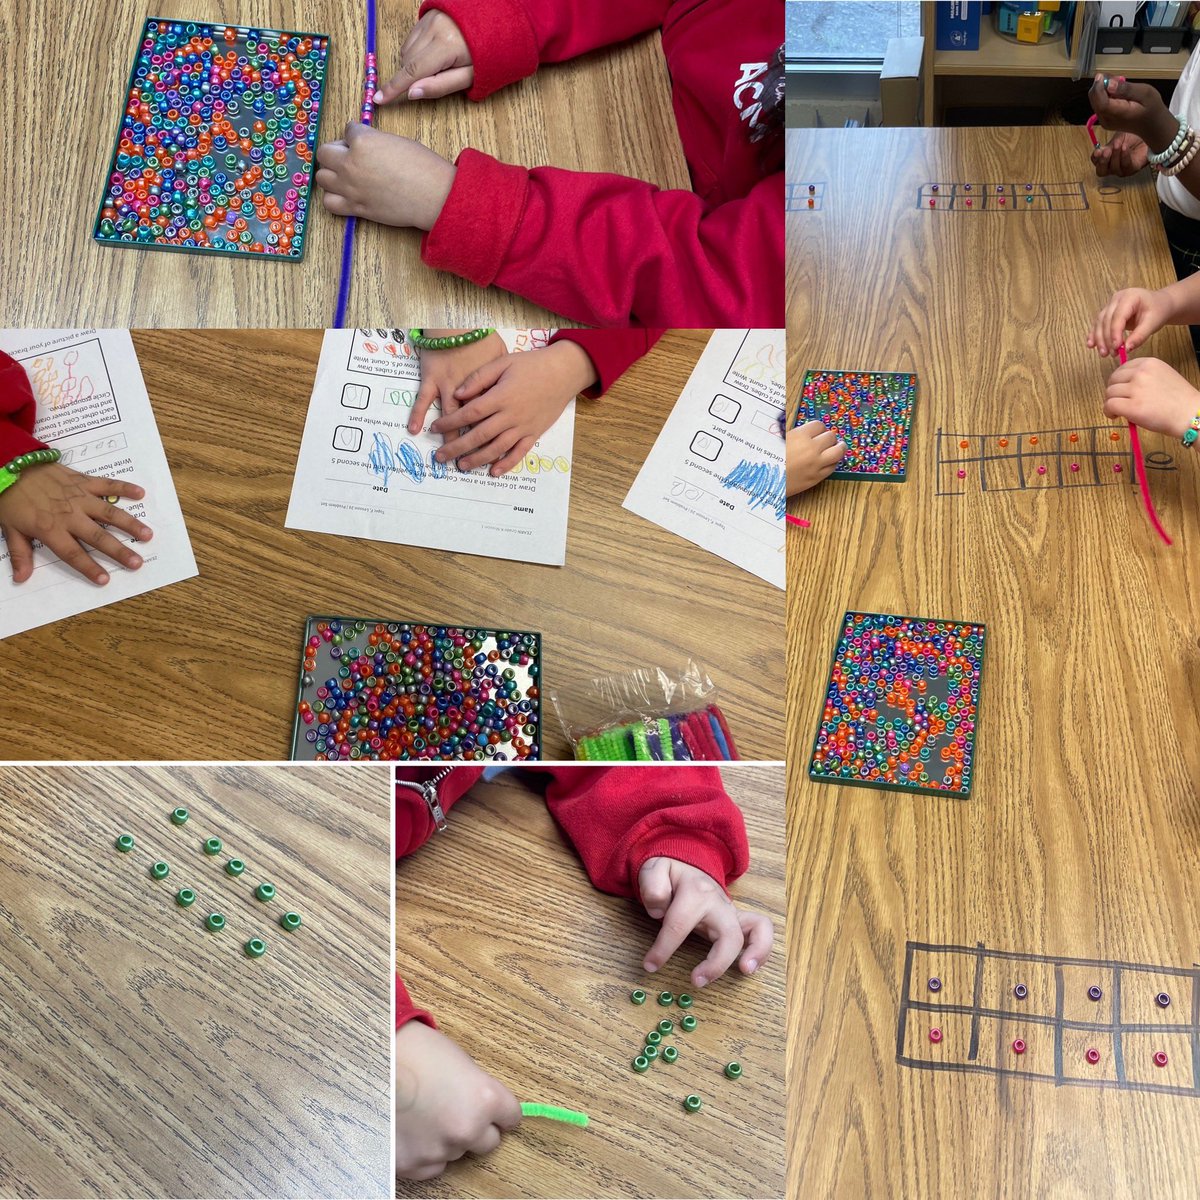 Working with ten. We built ten, checked with our partner, and made our bracelet during our Zearn intervention lesson. #reflect #learnerframework #RISDWeAreOne #RISDBelieves #RISDLeadandInt #ACMFalcons